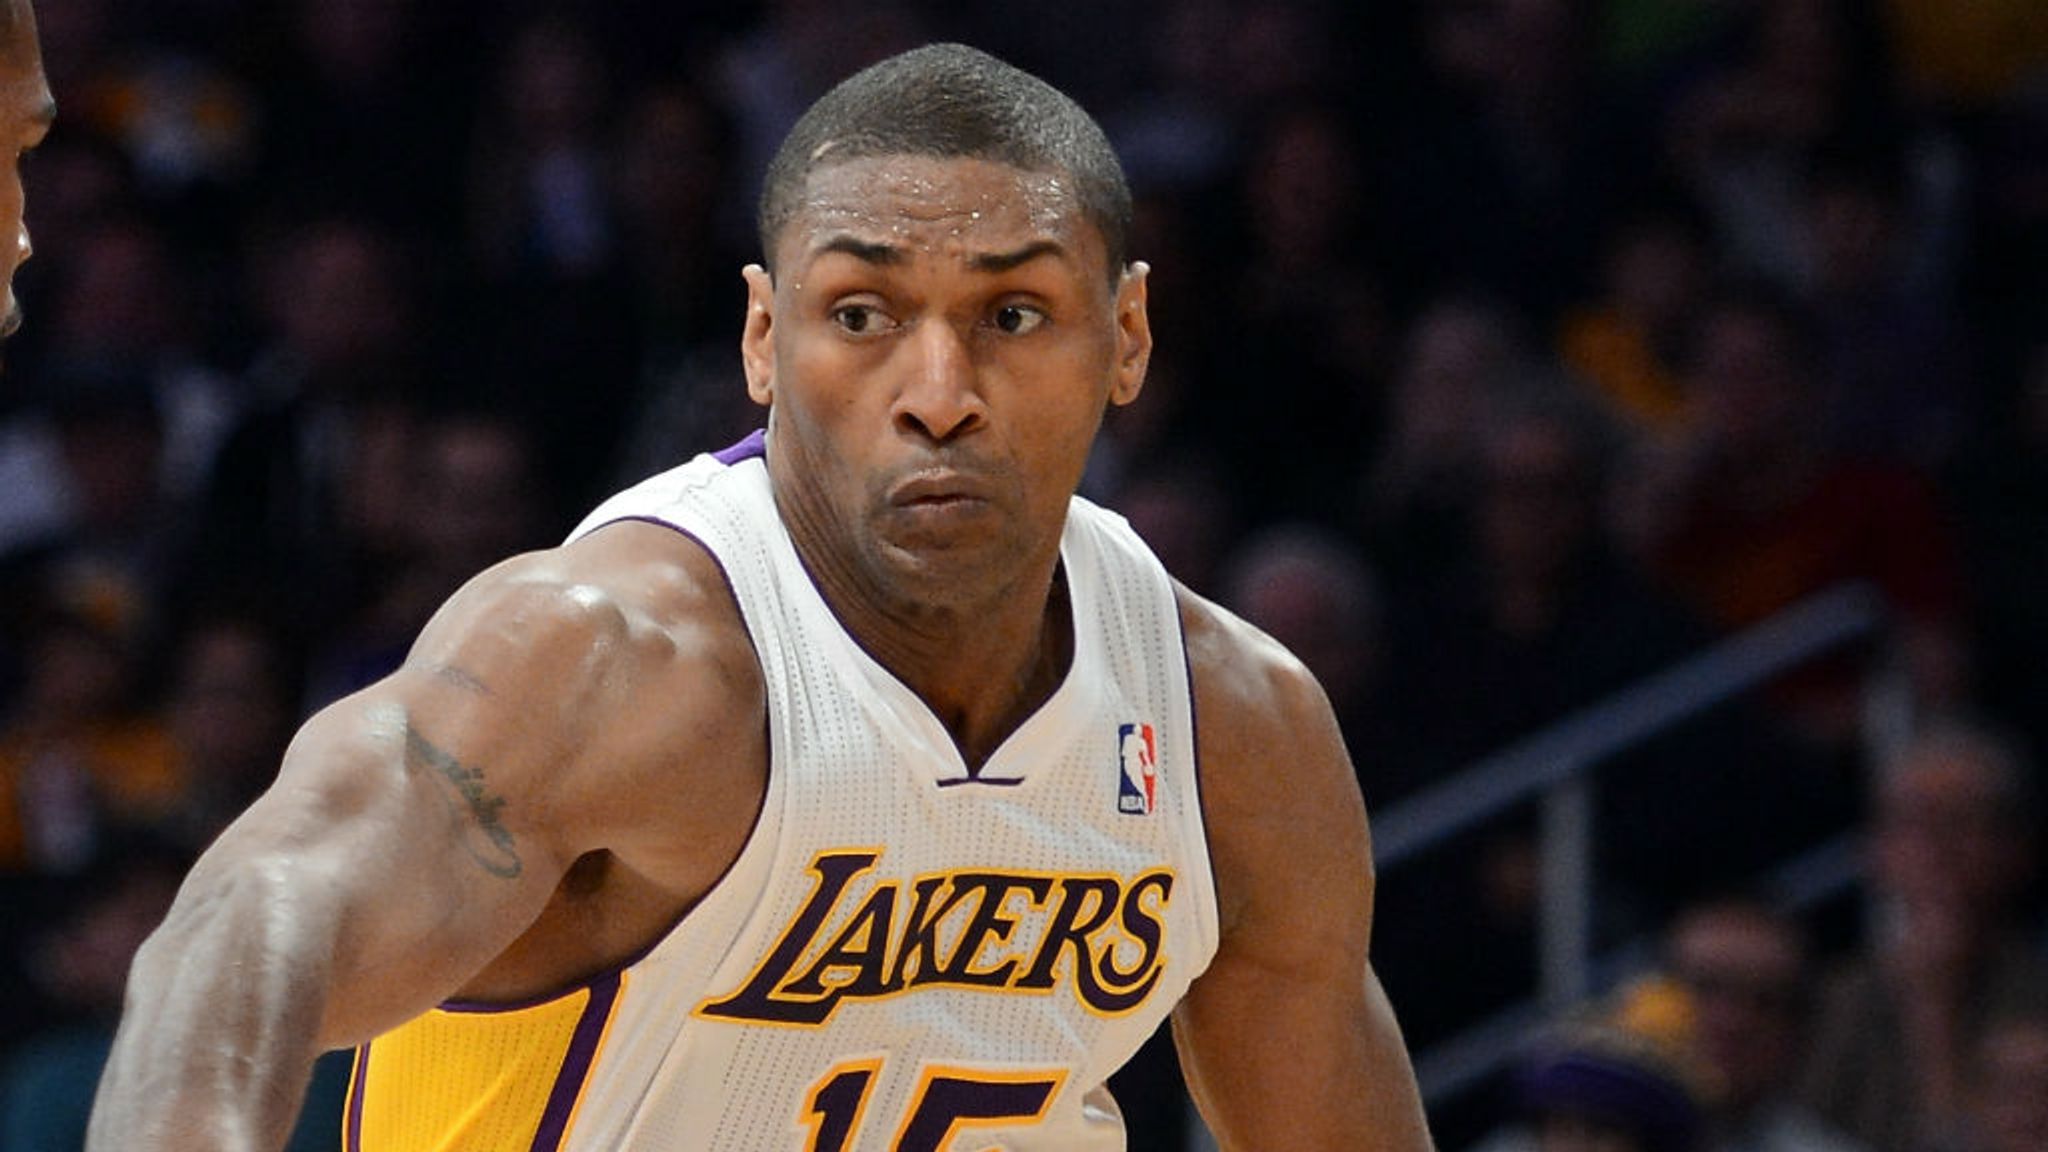 Metta World Peace is back with the Lakers